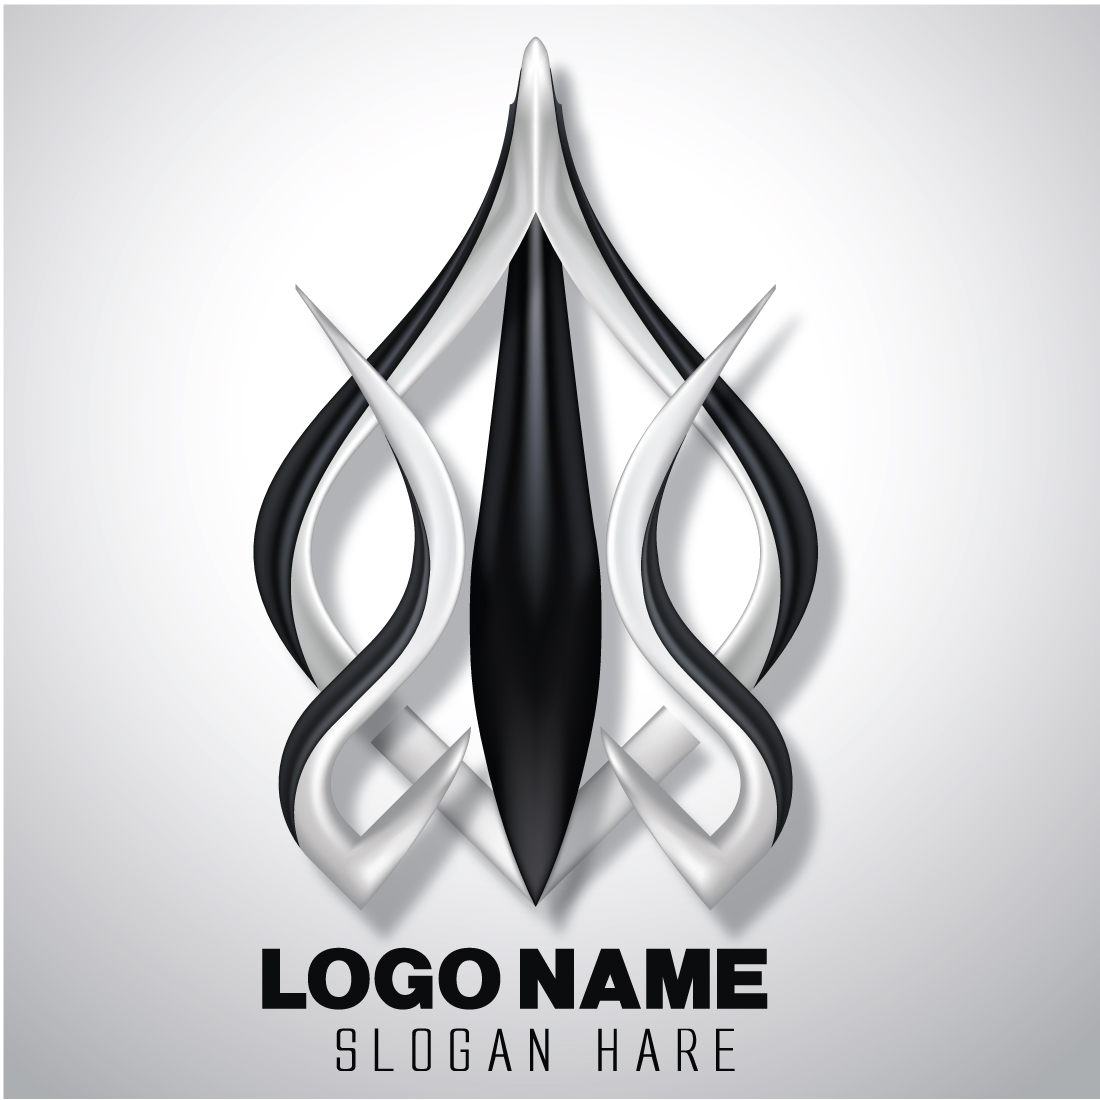 Elegant 3d silver and black metallic iconic logo template cover image.